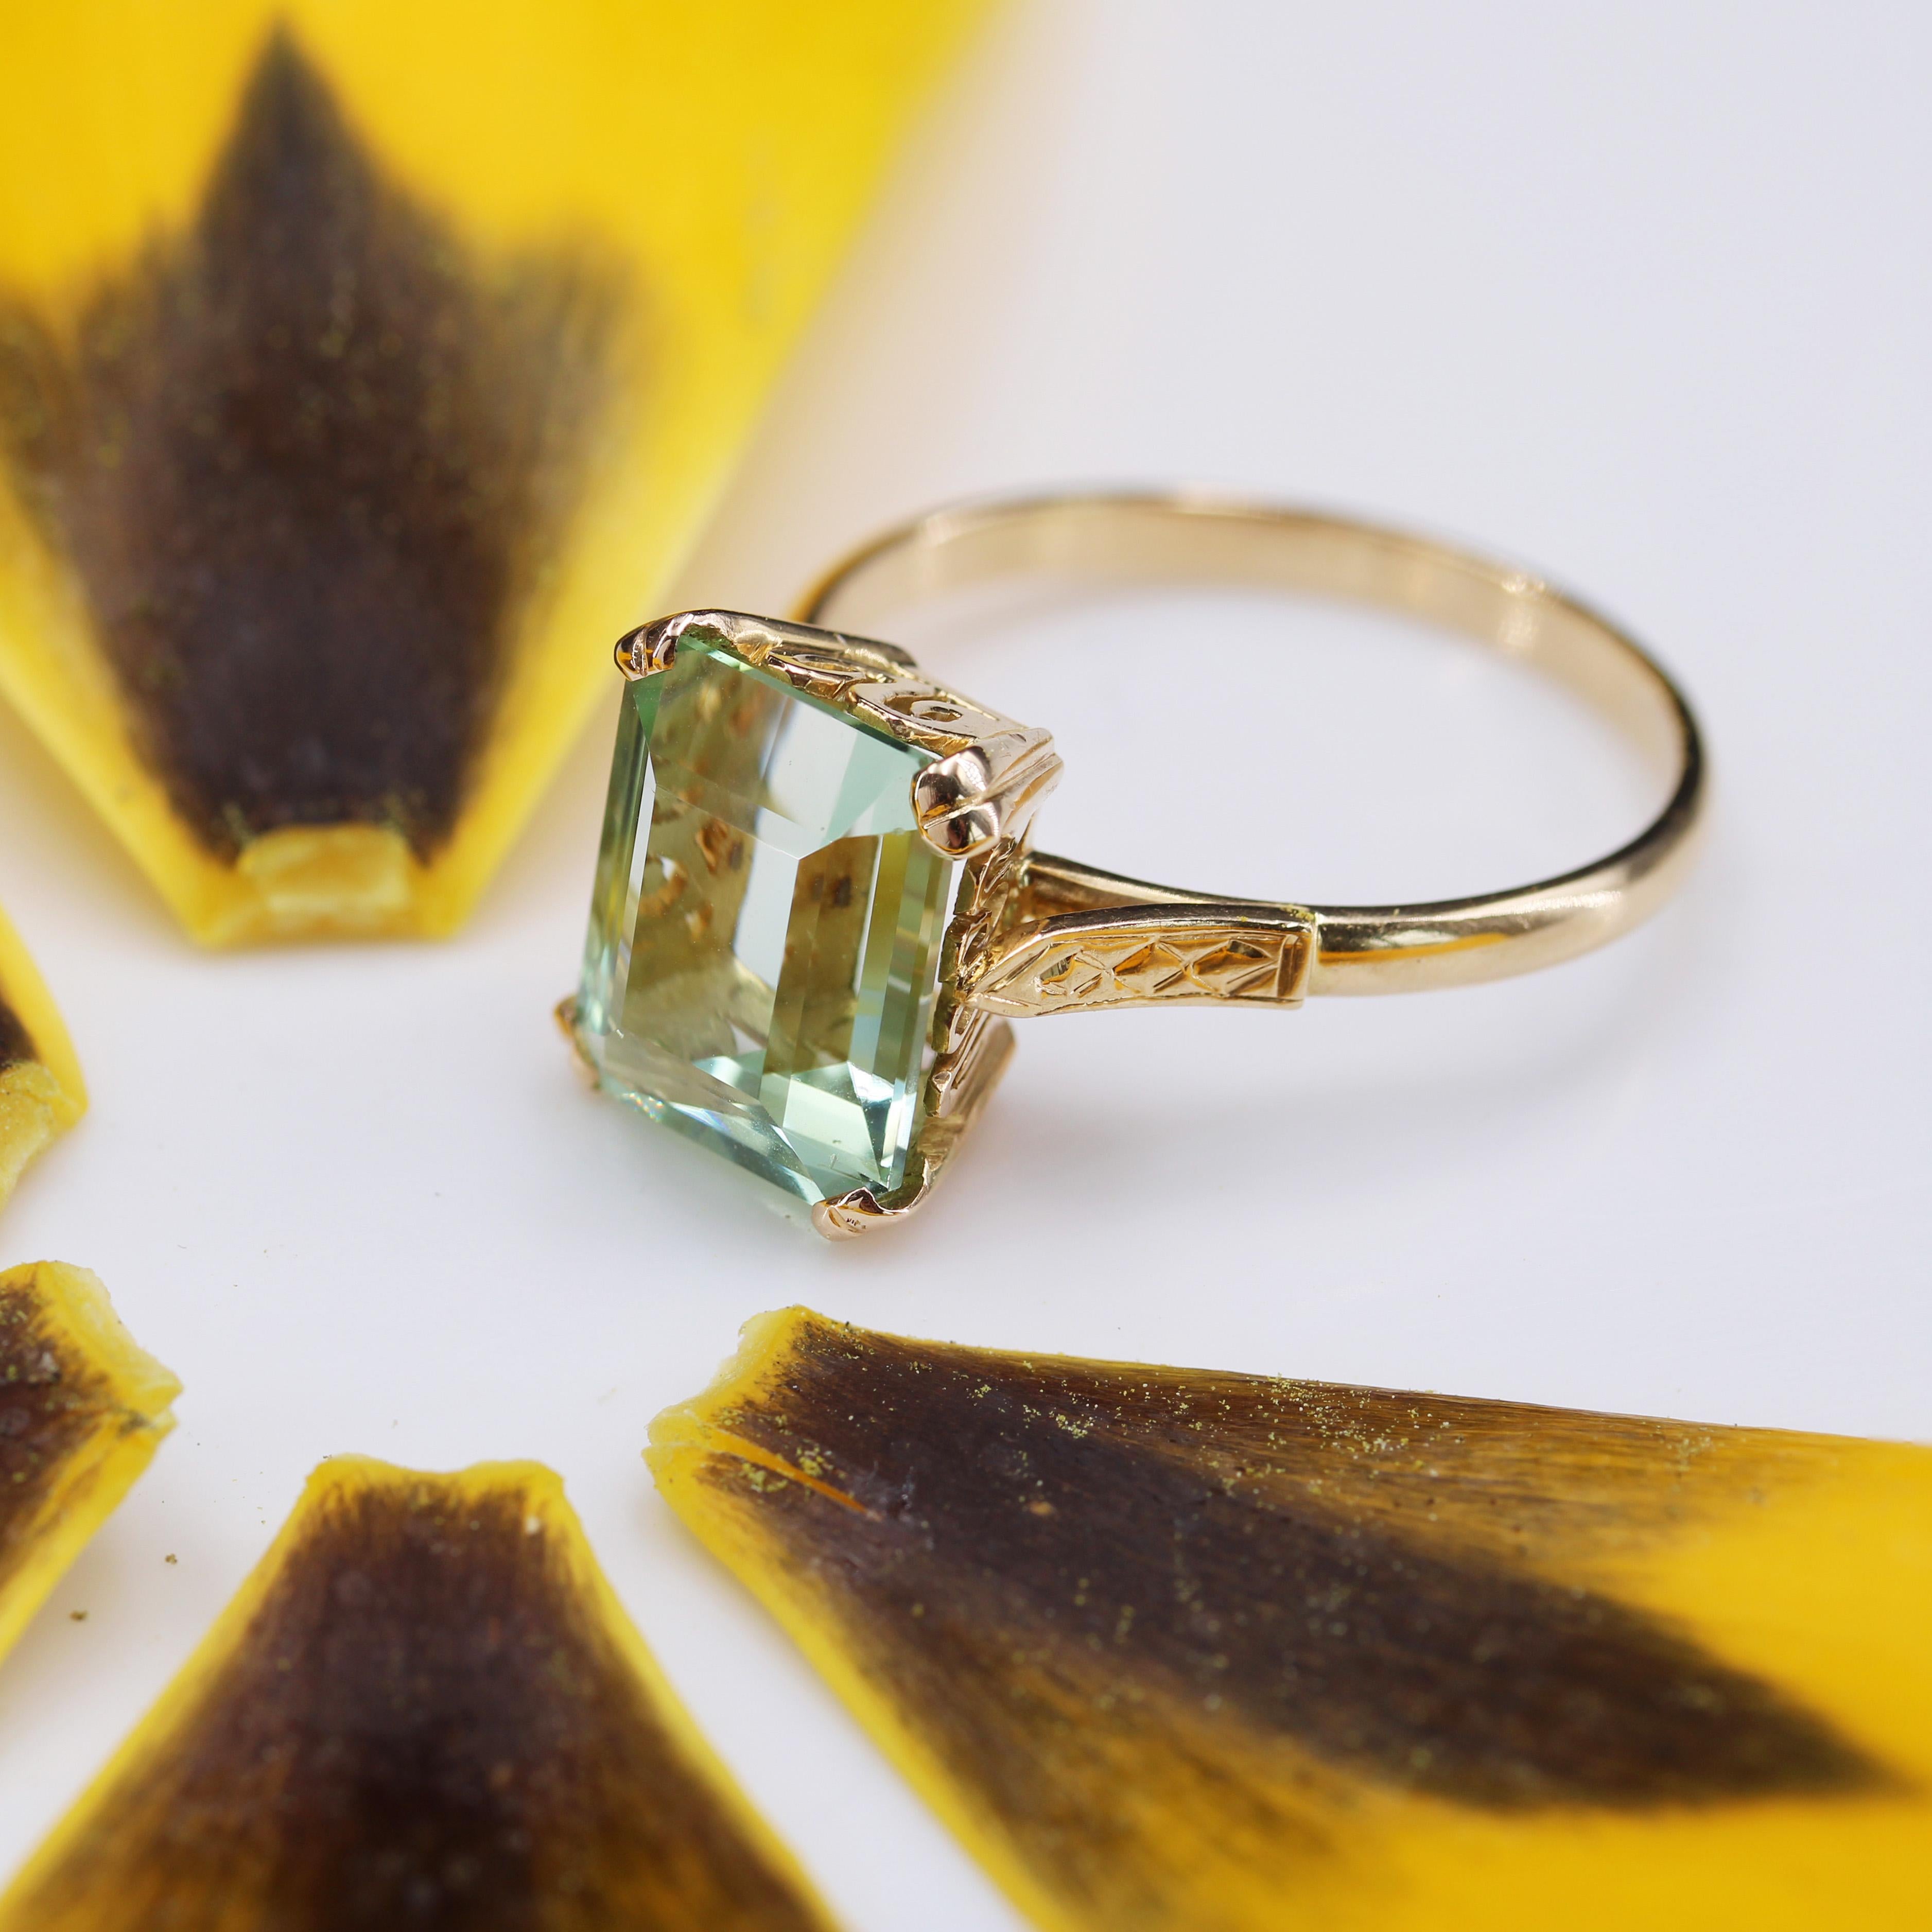 French 1960s 5.82 Carat Watermint Tourmaline 18 Karat Yellow Gold Ring For Sale 5